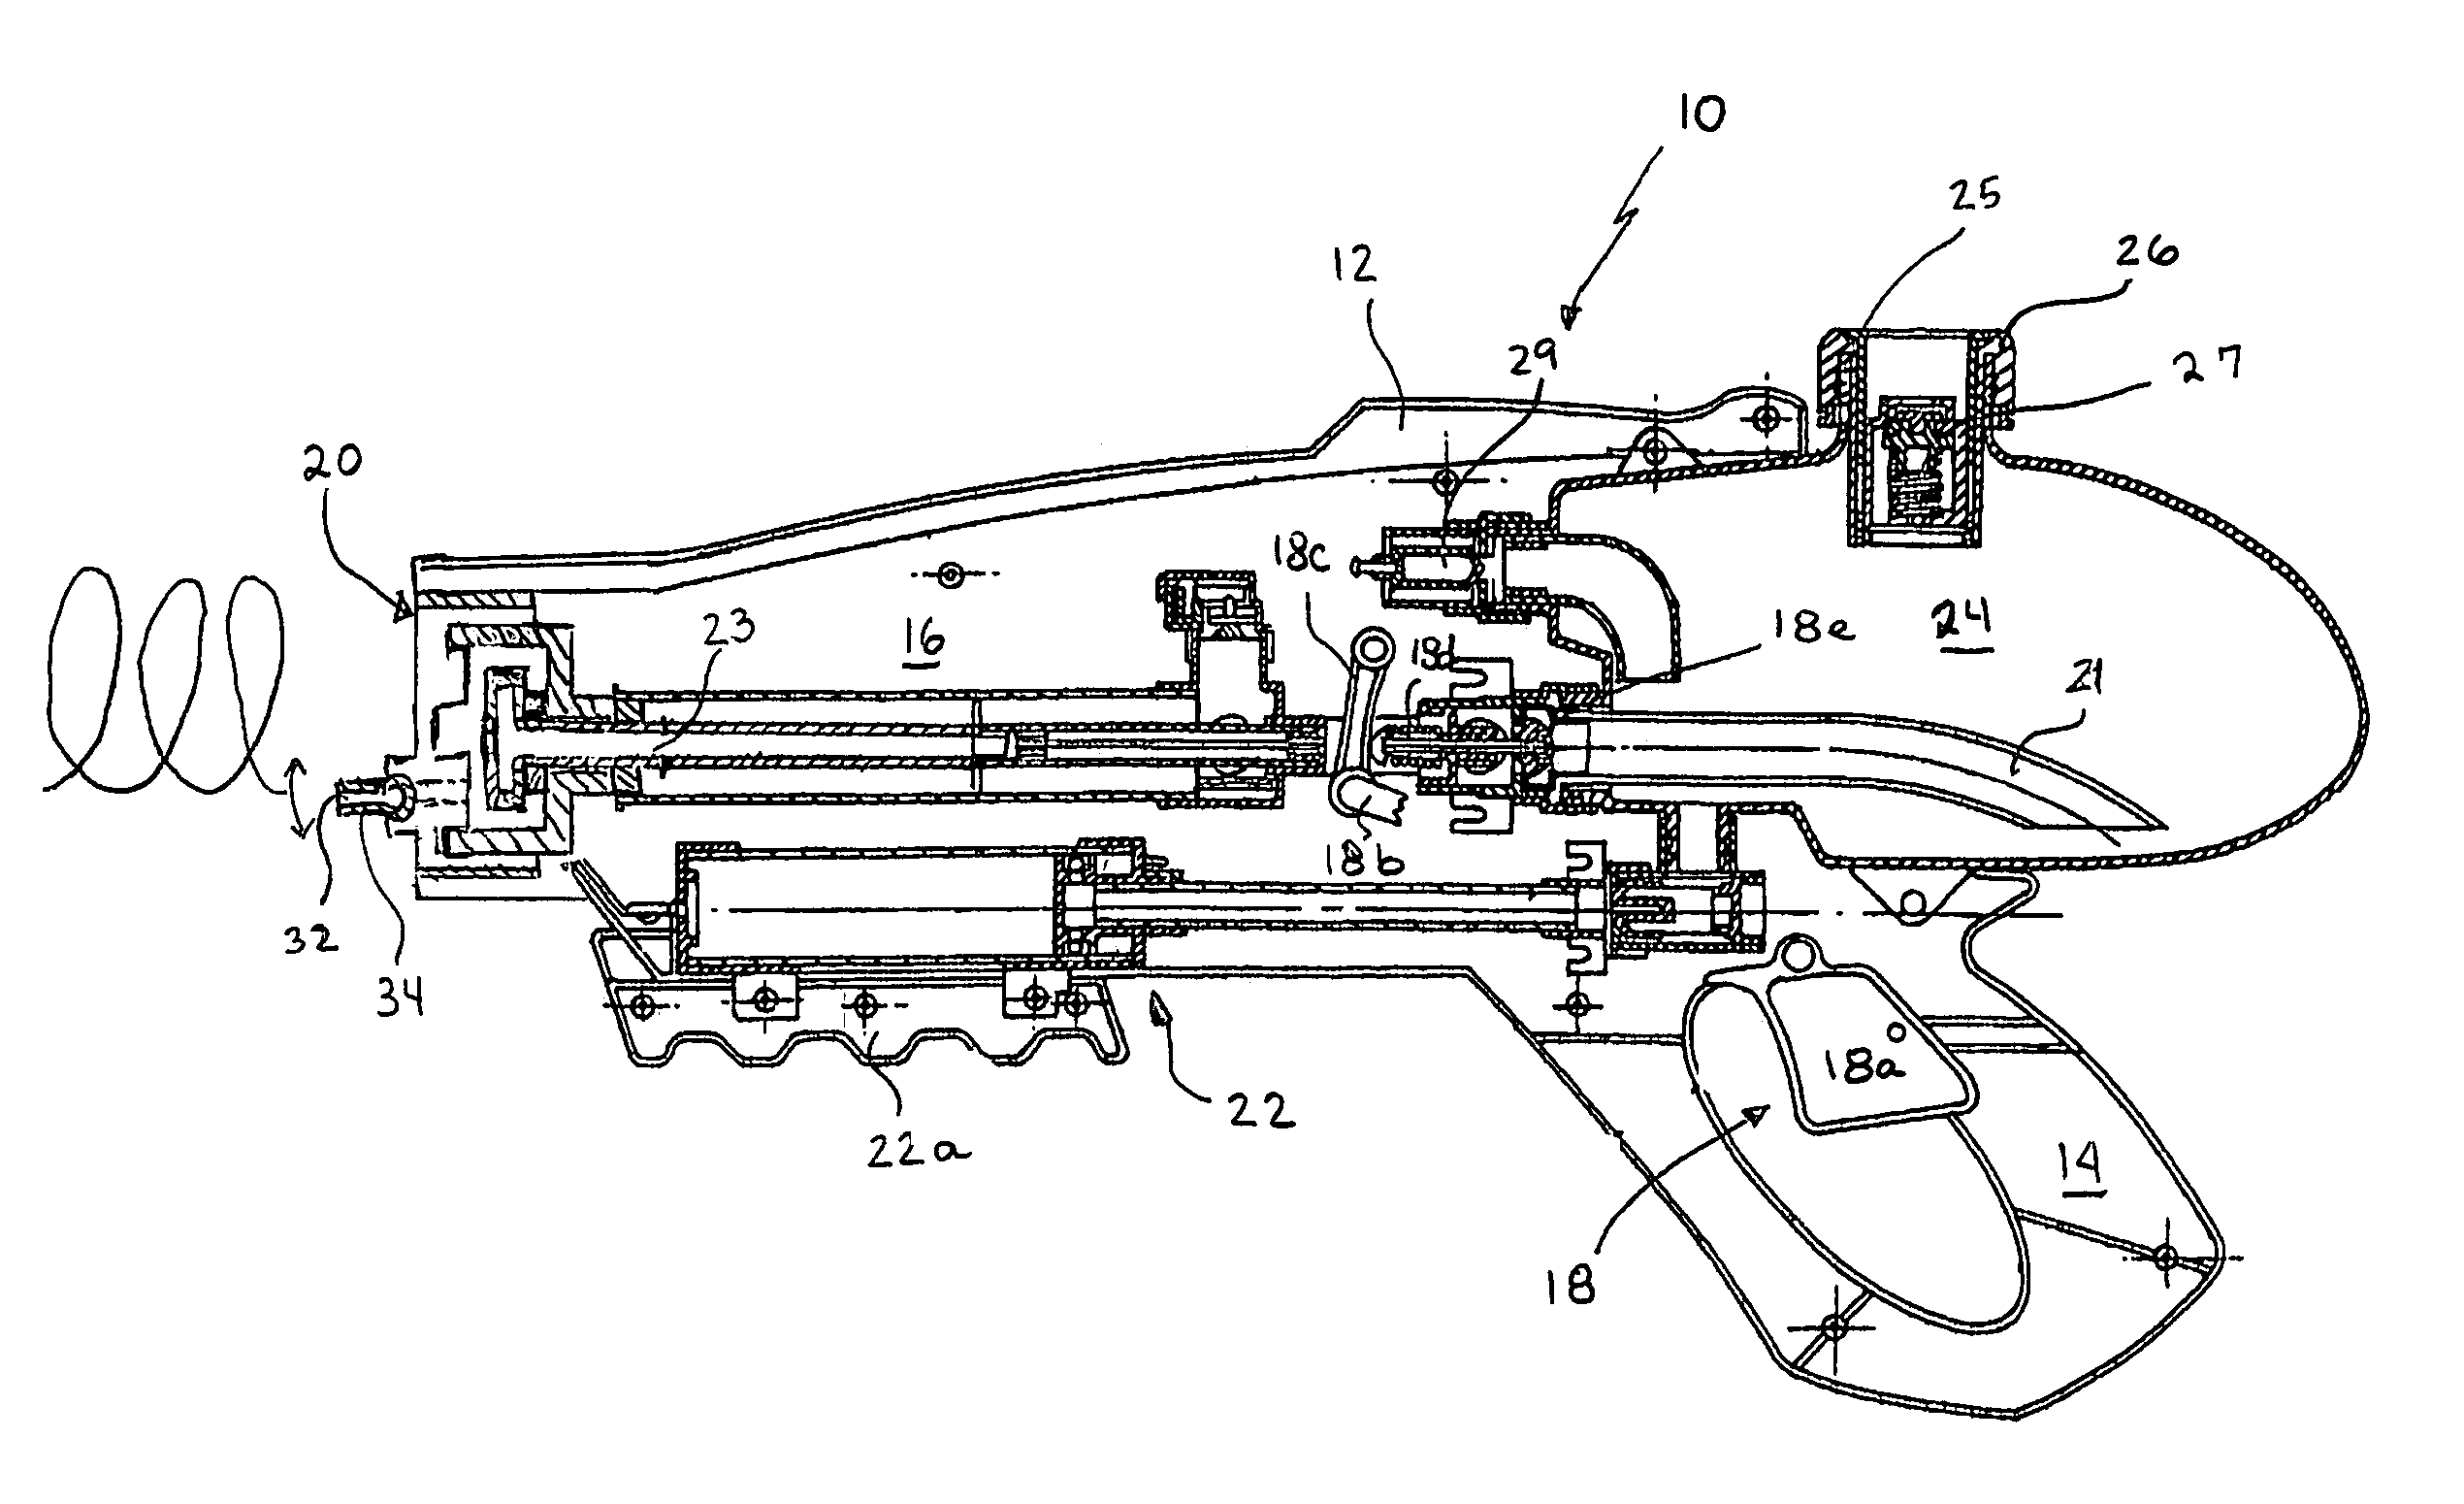 Water gun amusement devices and methods of using the same